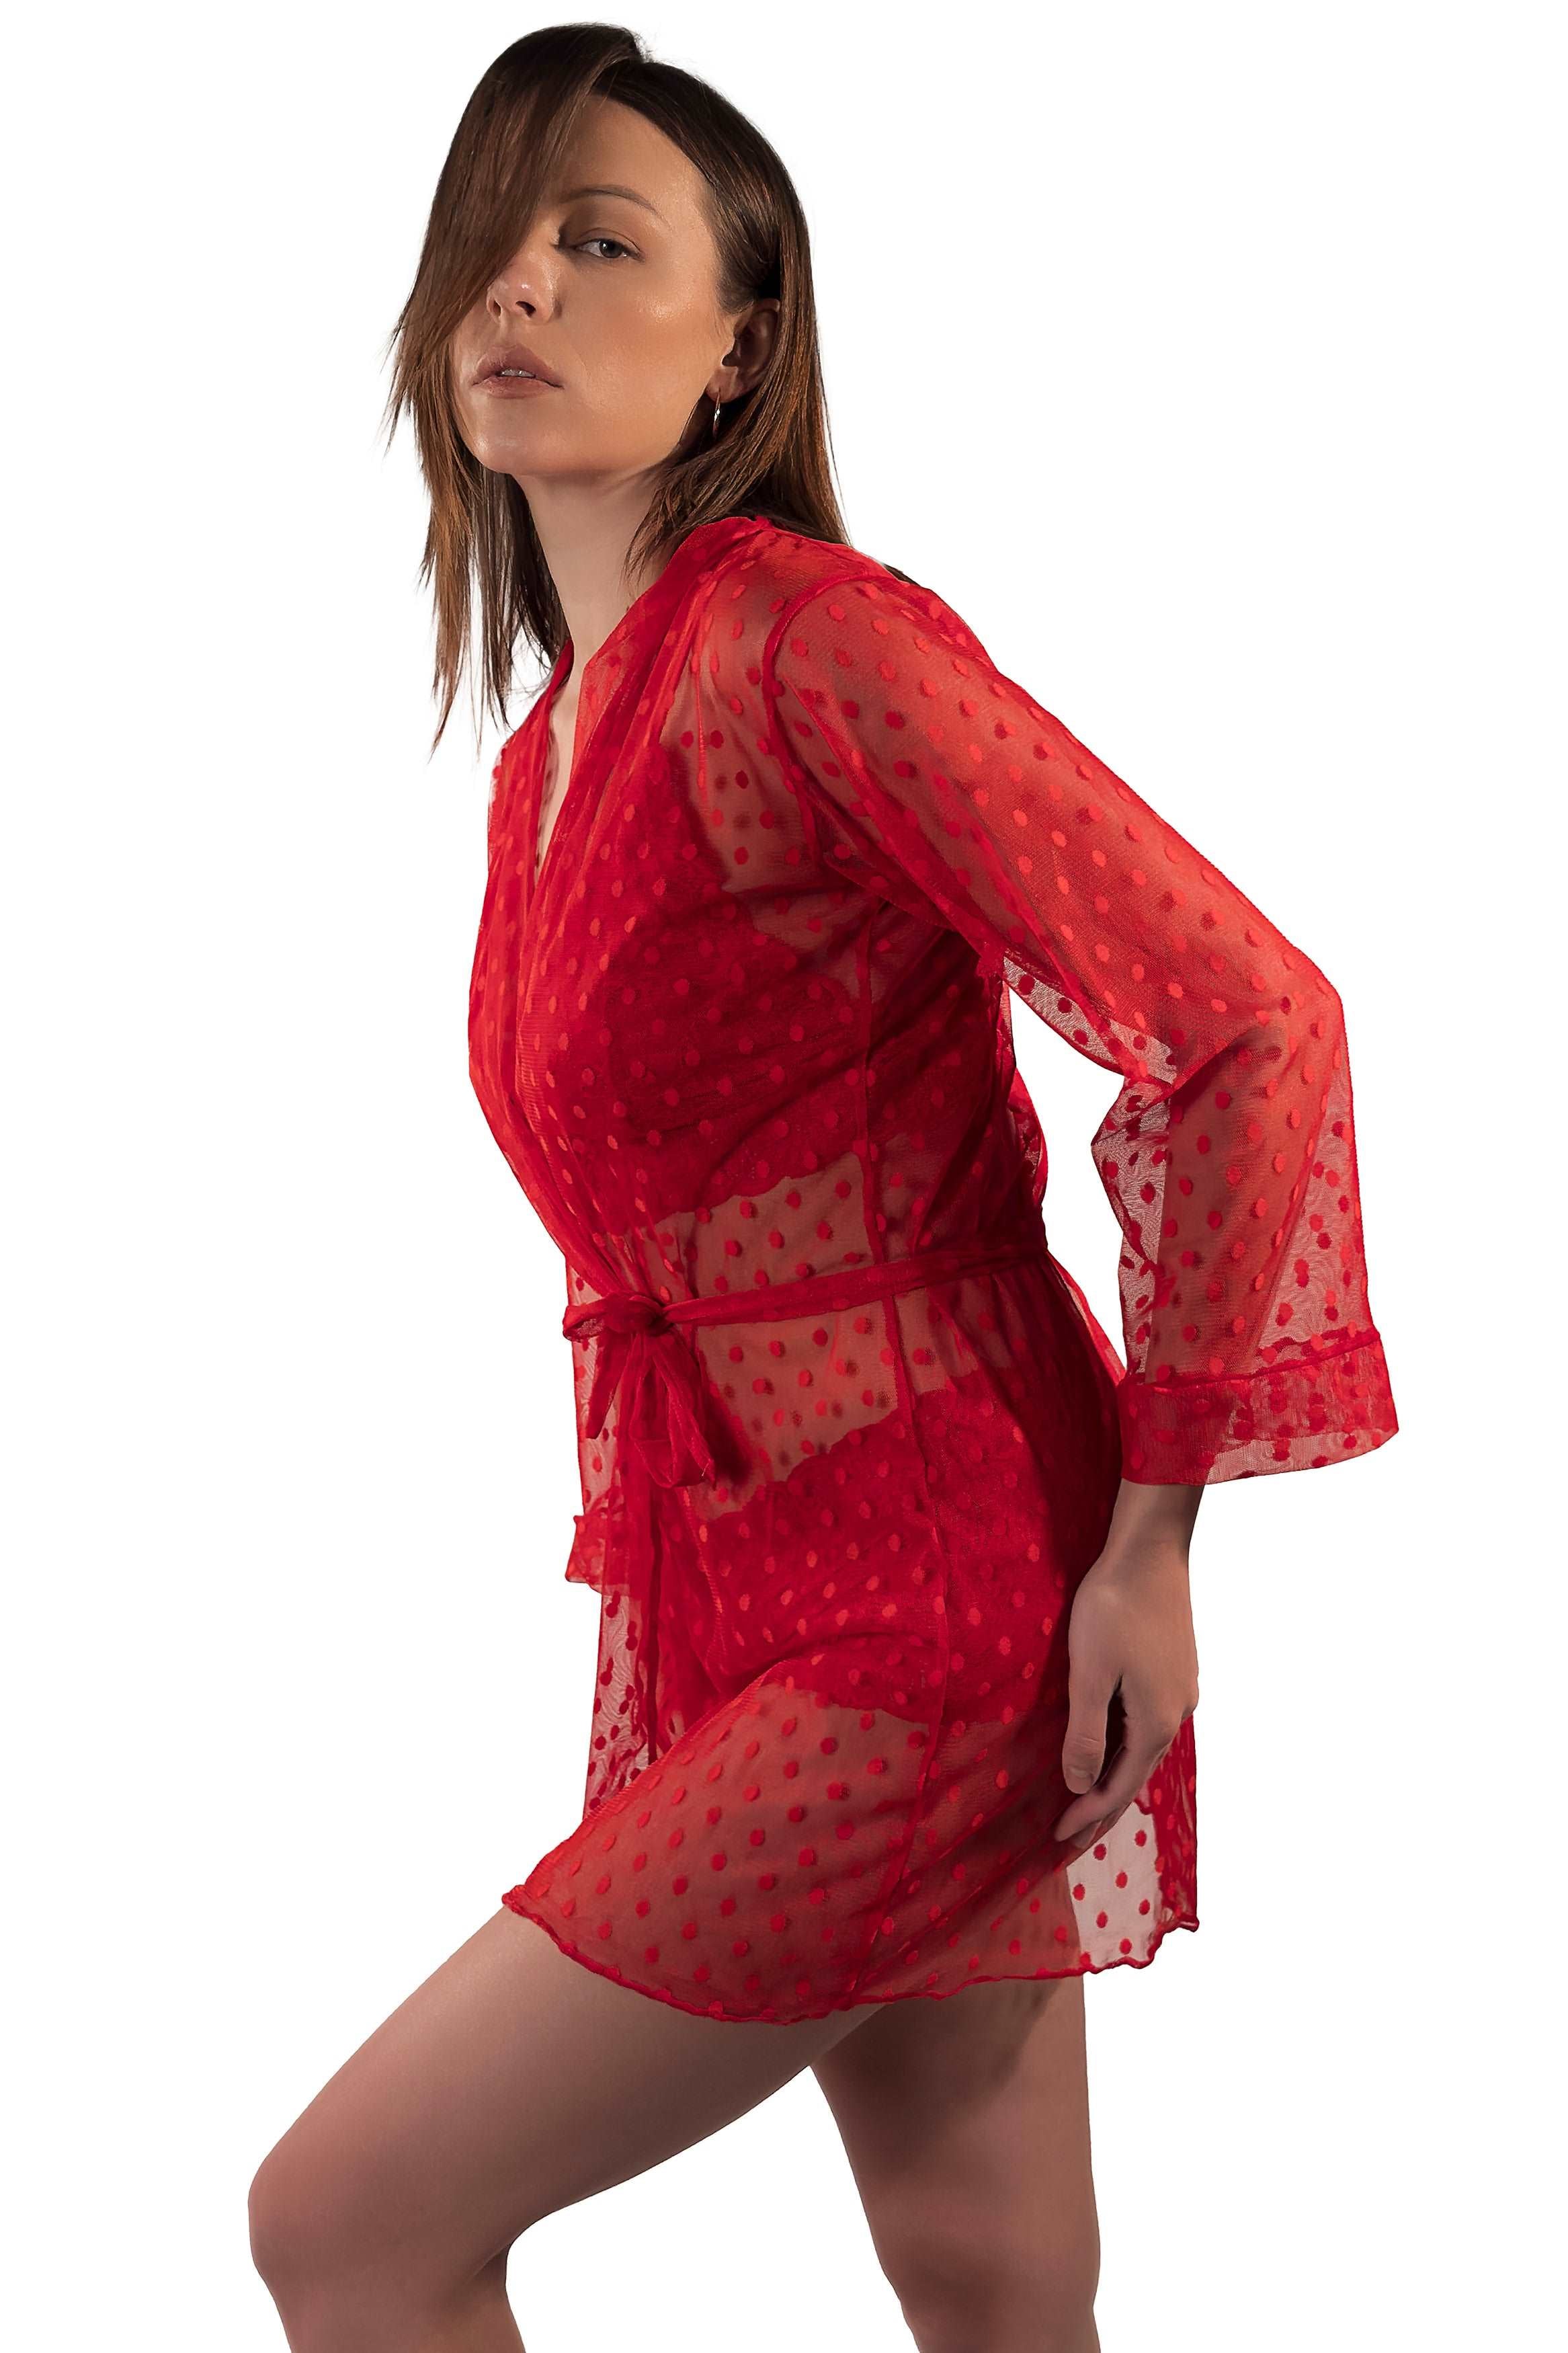 Sultry Red Lace Lingerie and Robe Ensemble